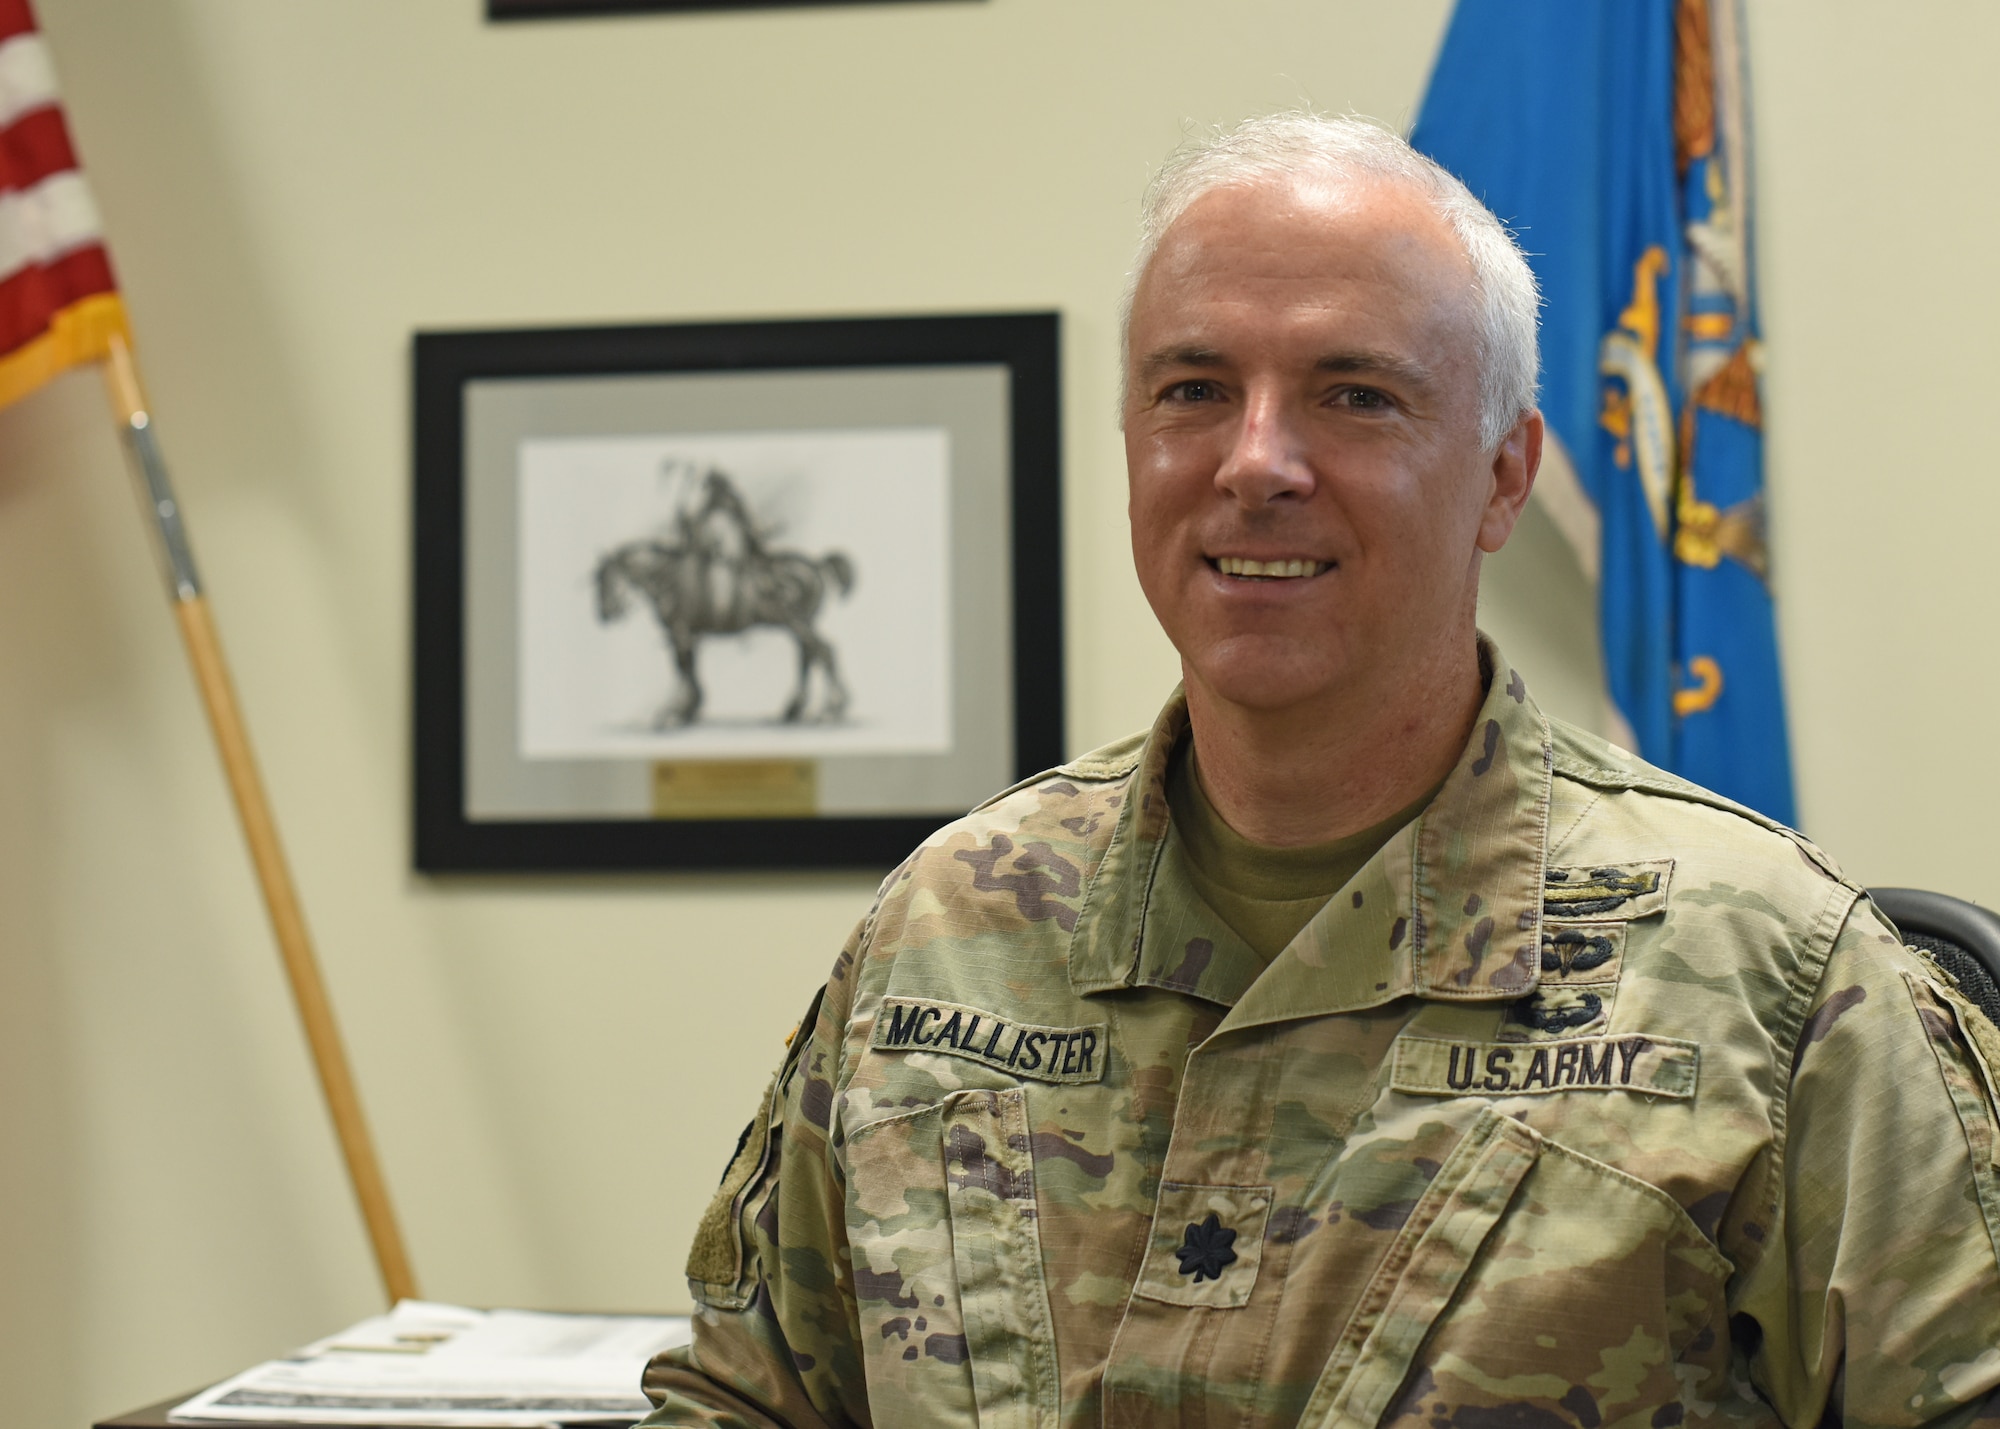 U.S. Army Lt. Col. John McAllister, 344th Military Intelligence Battalion commander, poses for a photo at his desk, Goodfellow Air Force Base, Texas, August 2, 2022. McAllister assumed command of the 344th MI BN on June 21. (U.S. Air Force photo by Airman 1st Class Zachary Heimbuch)